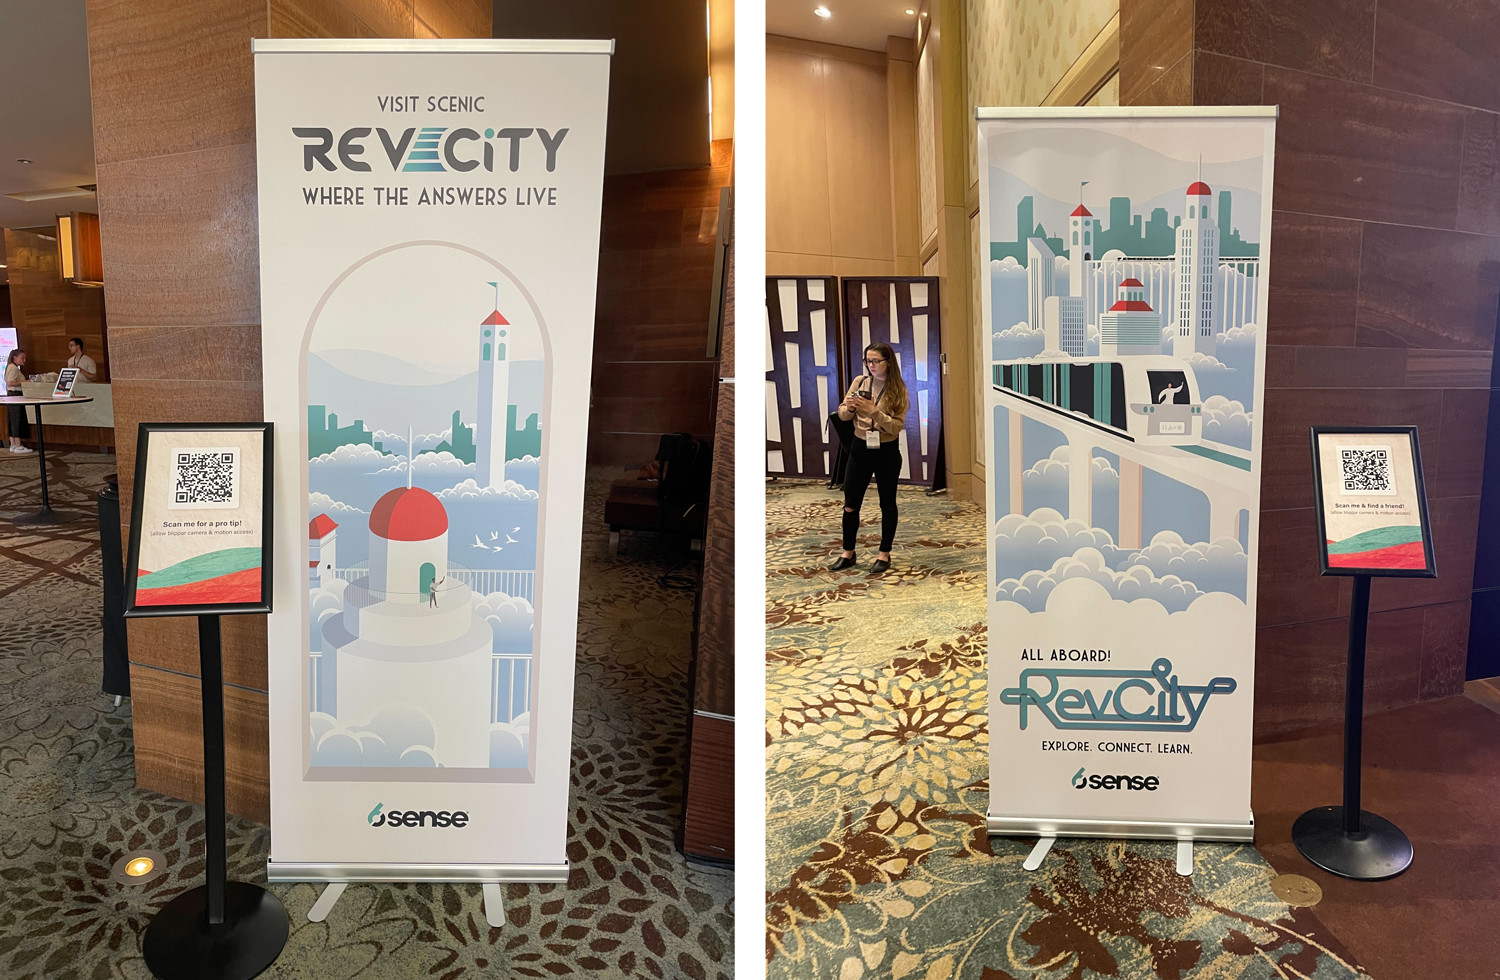 Posters at the Breakthrough Conference advertise RevCity.